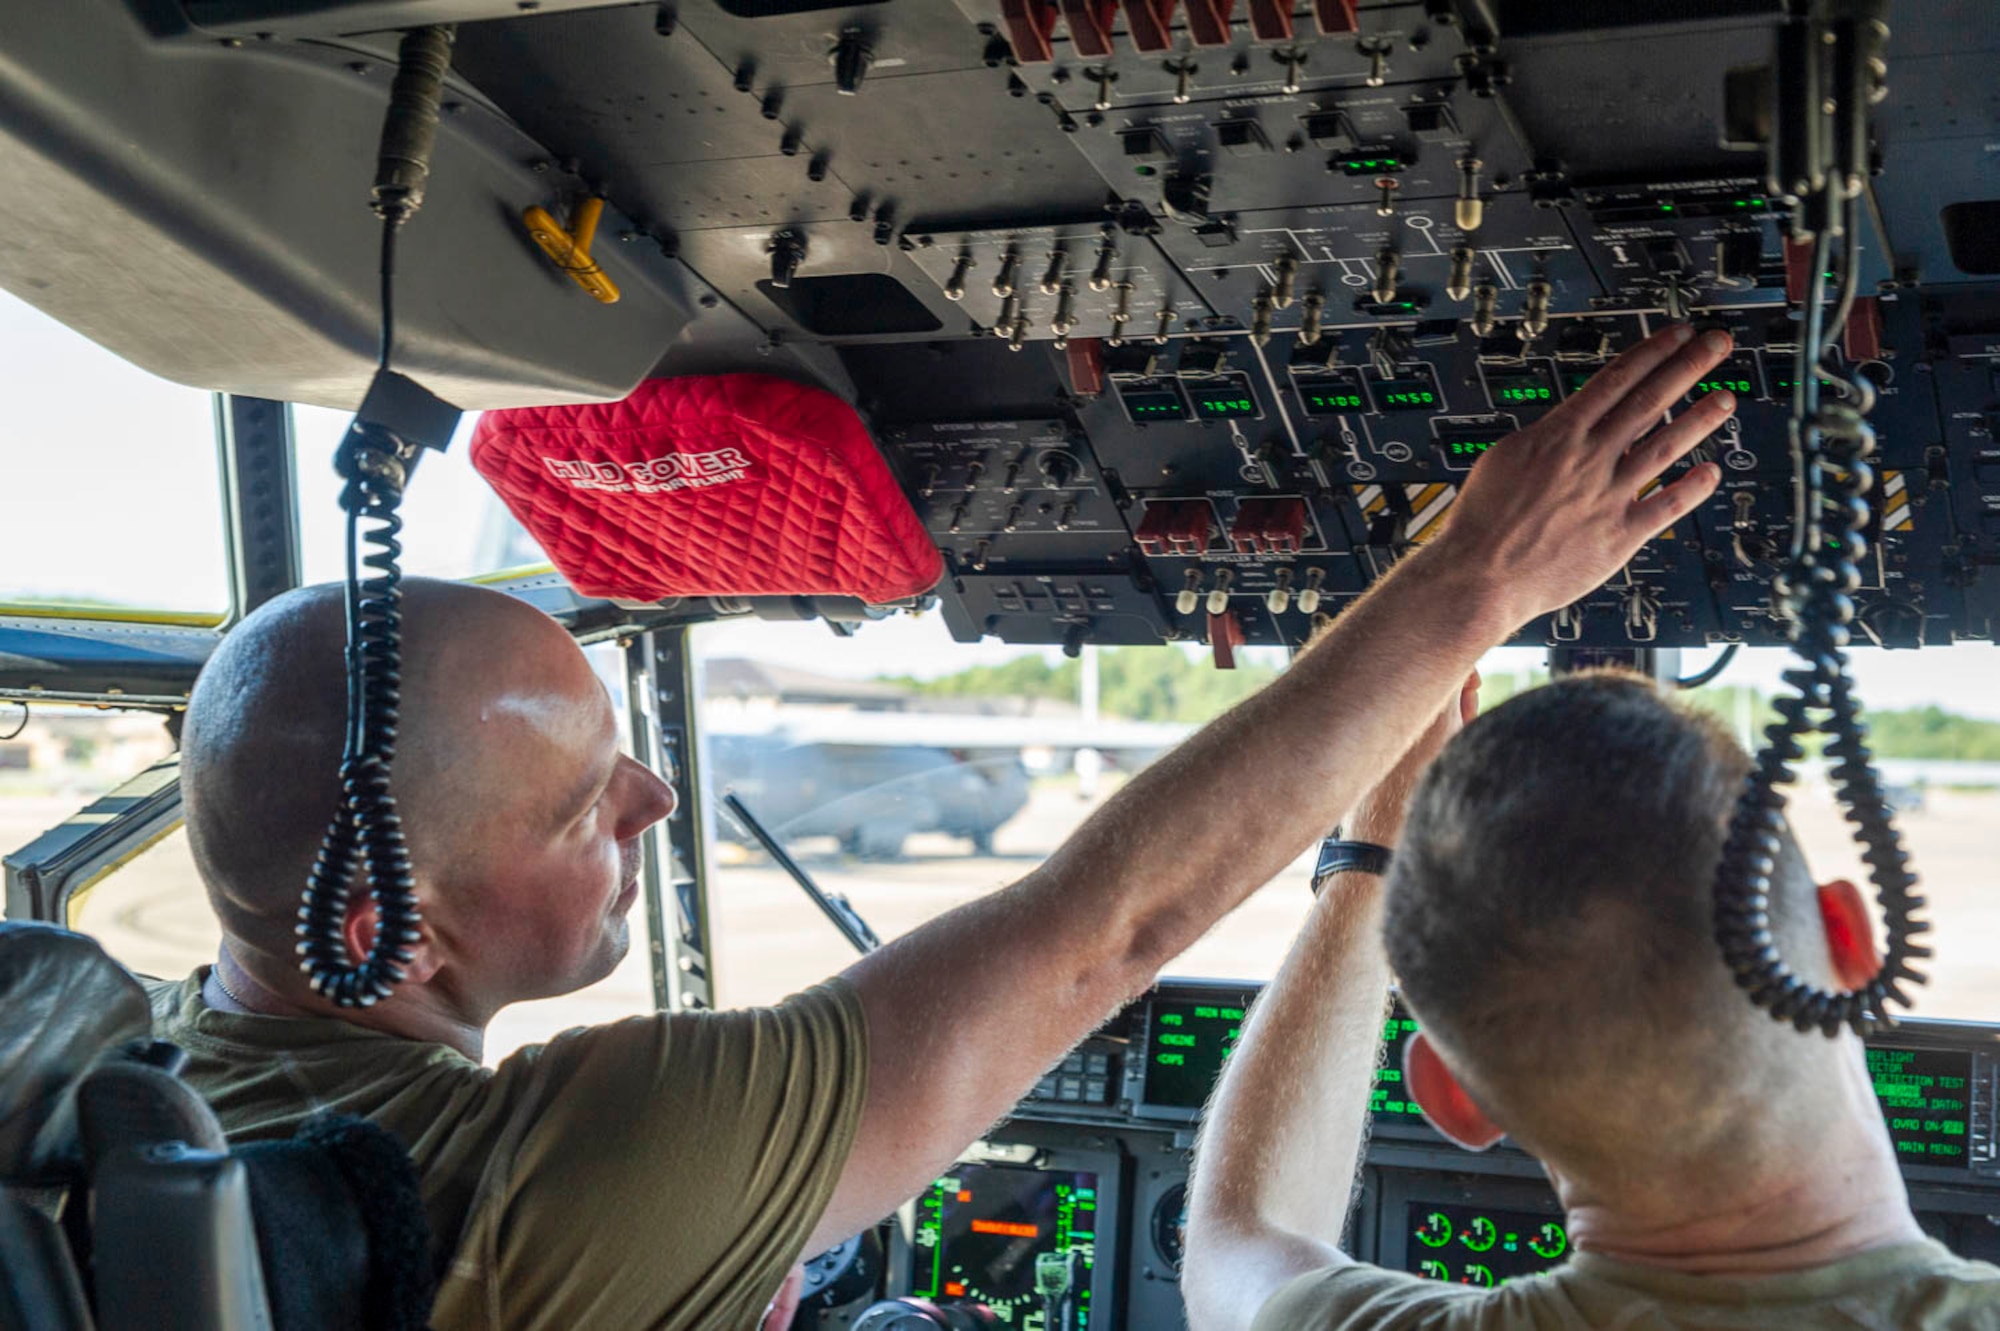 Air Force Reserve Airmen from the 913th Maintenance Squadron conduct avionics system checks on a C-130J Hercules on August 15, 2019, at Little Rock Air Force Base, Ark.  Mobility aircraft, such as the C-130J, deliver critical personnel and cargo and provide airdrop of time-sensitive supplies, food and ammunition on a global scale. A critical part of the airlift capabilities are the efforts of the maintenance personnel who ensure the workhorse of the mobility force, the C-130J, is always ready, always there! The 913th Airlift Group was first assembled in July 2014 as a classic association with the 19th Airlift Wing. Since then, we have leveraged on our Total Force partners to hone our combat airlift tactics. (U.S. Air Force Reserve photo by Maj. Ashley Walker)